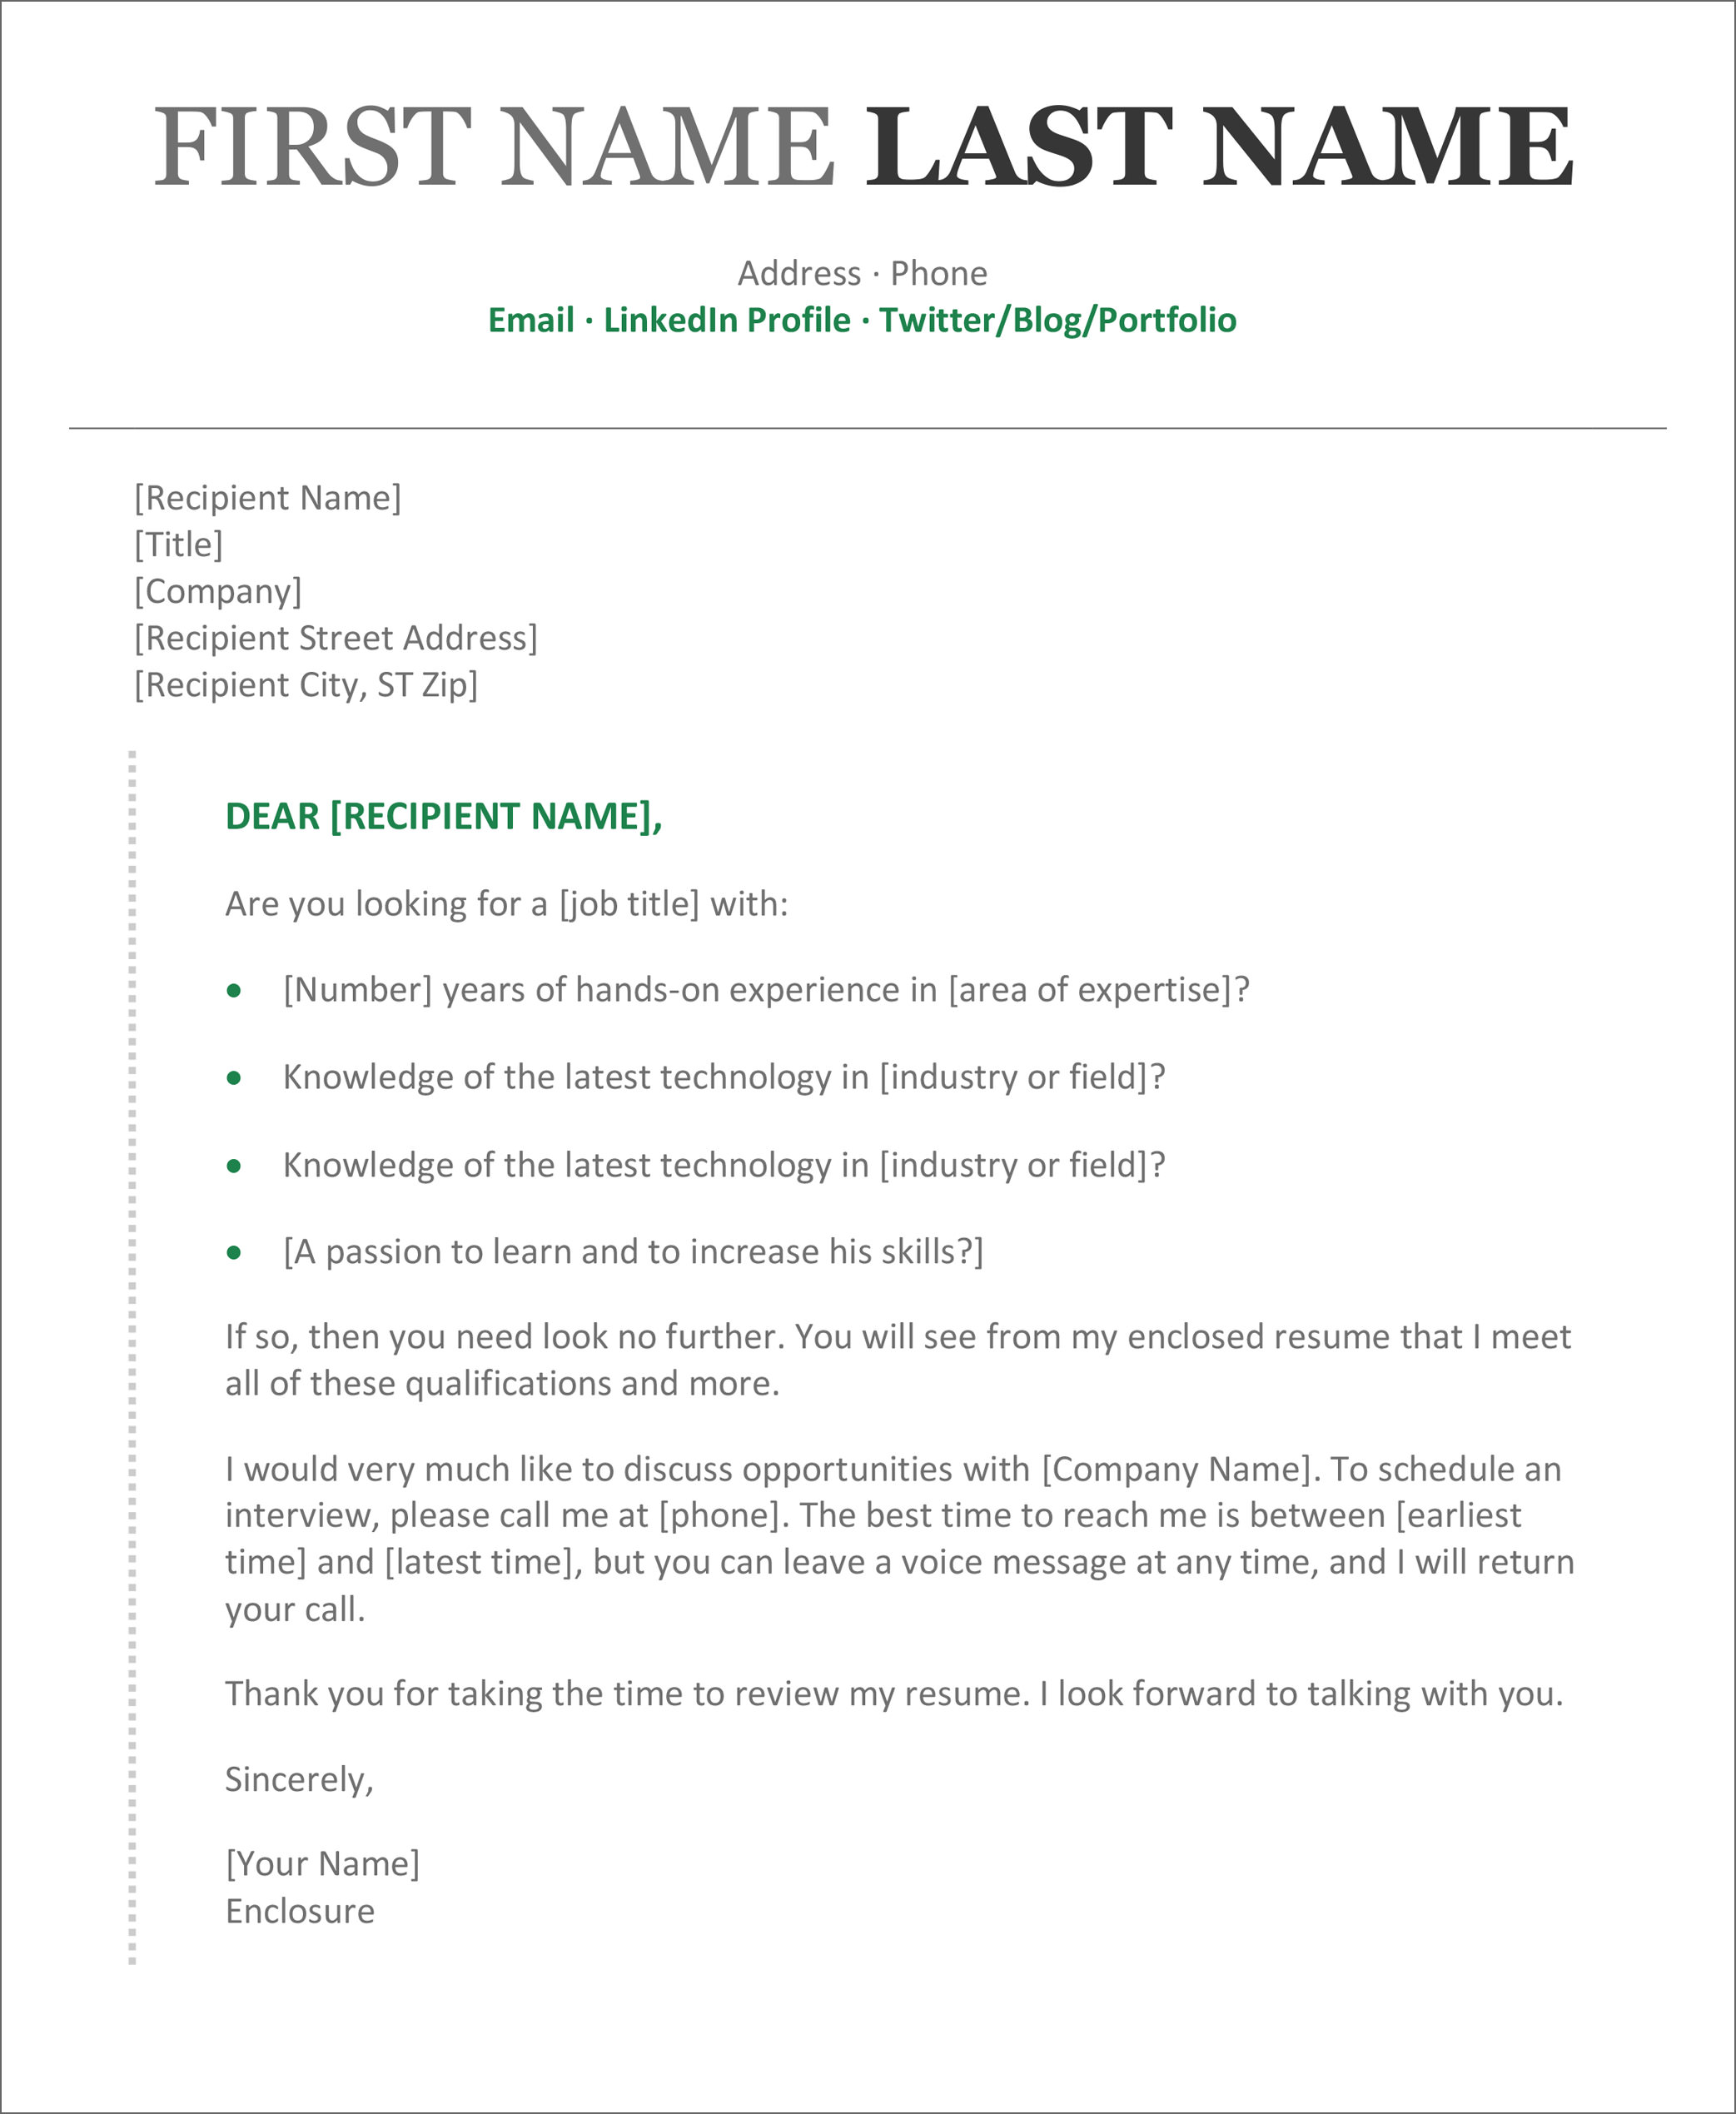 example cover letter in word